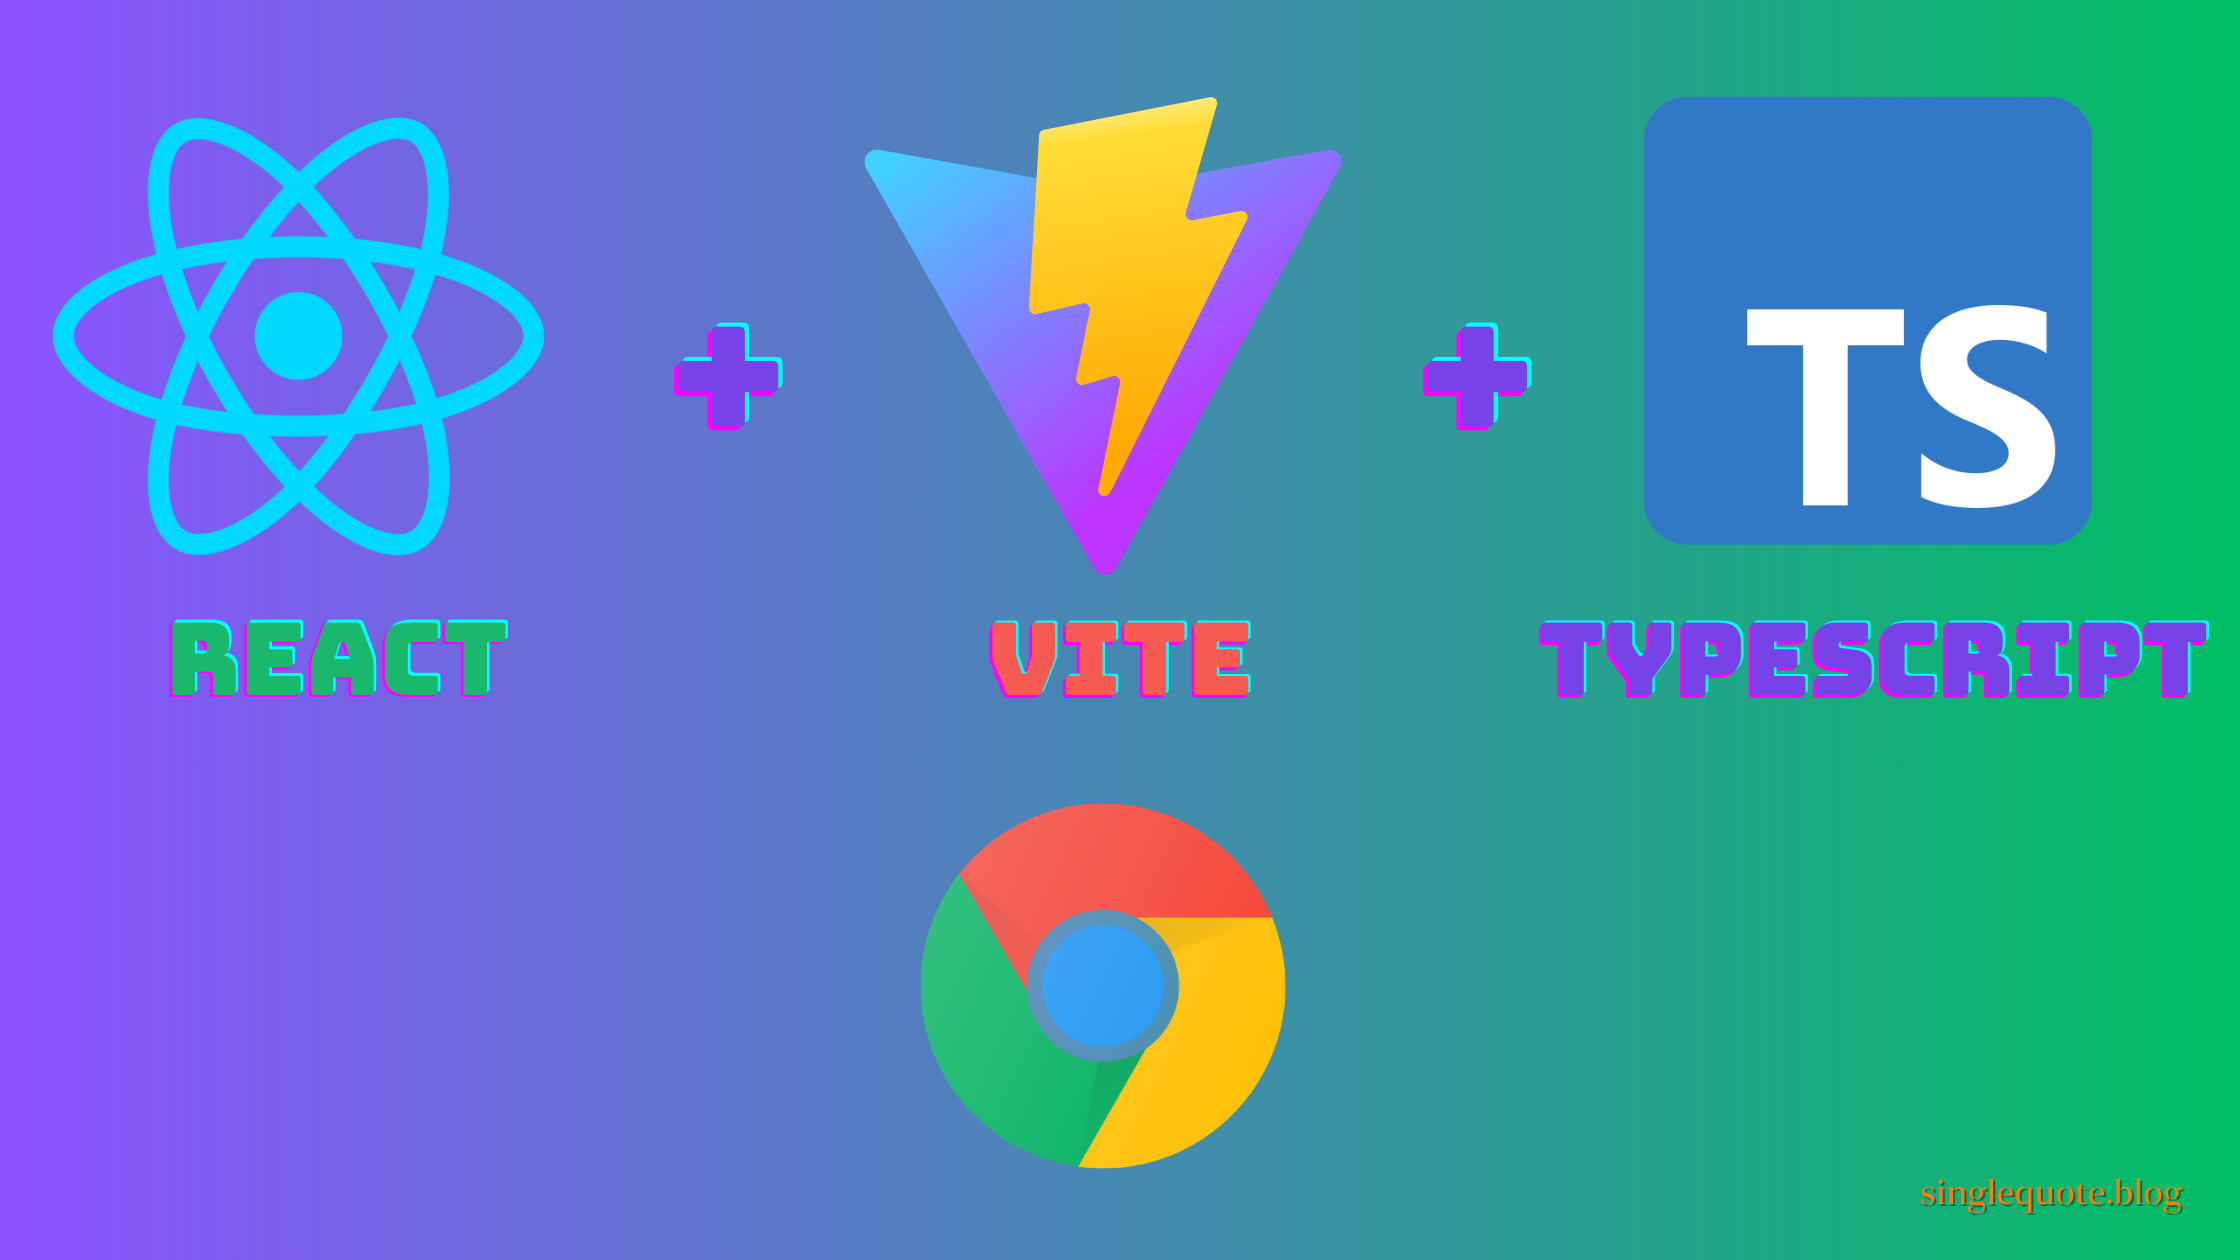 Stepwise process to create chrome extension usinf vite, react and typescript